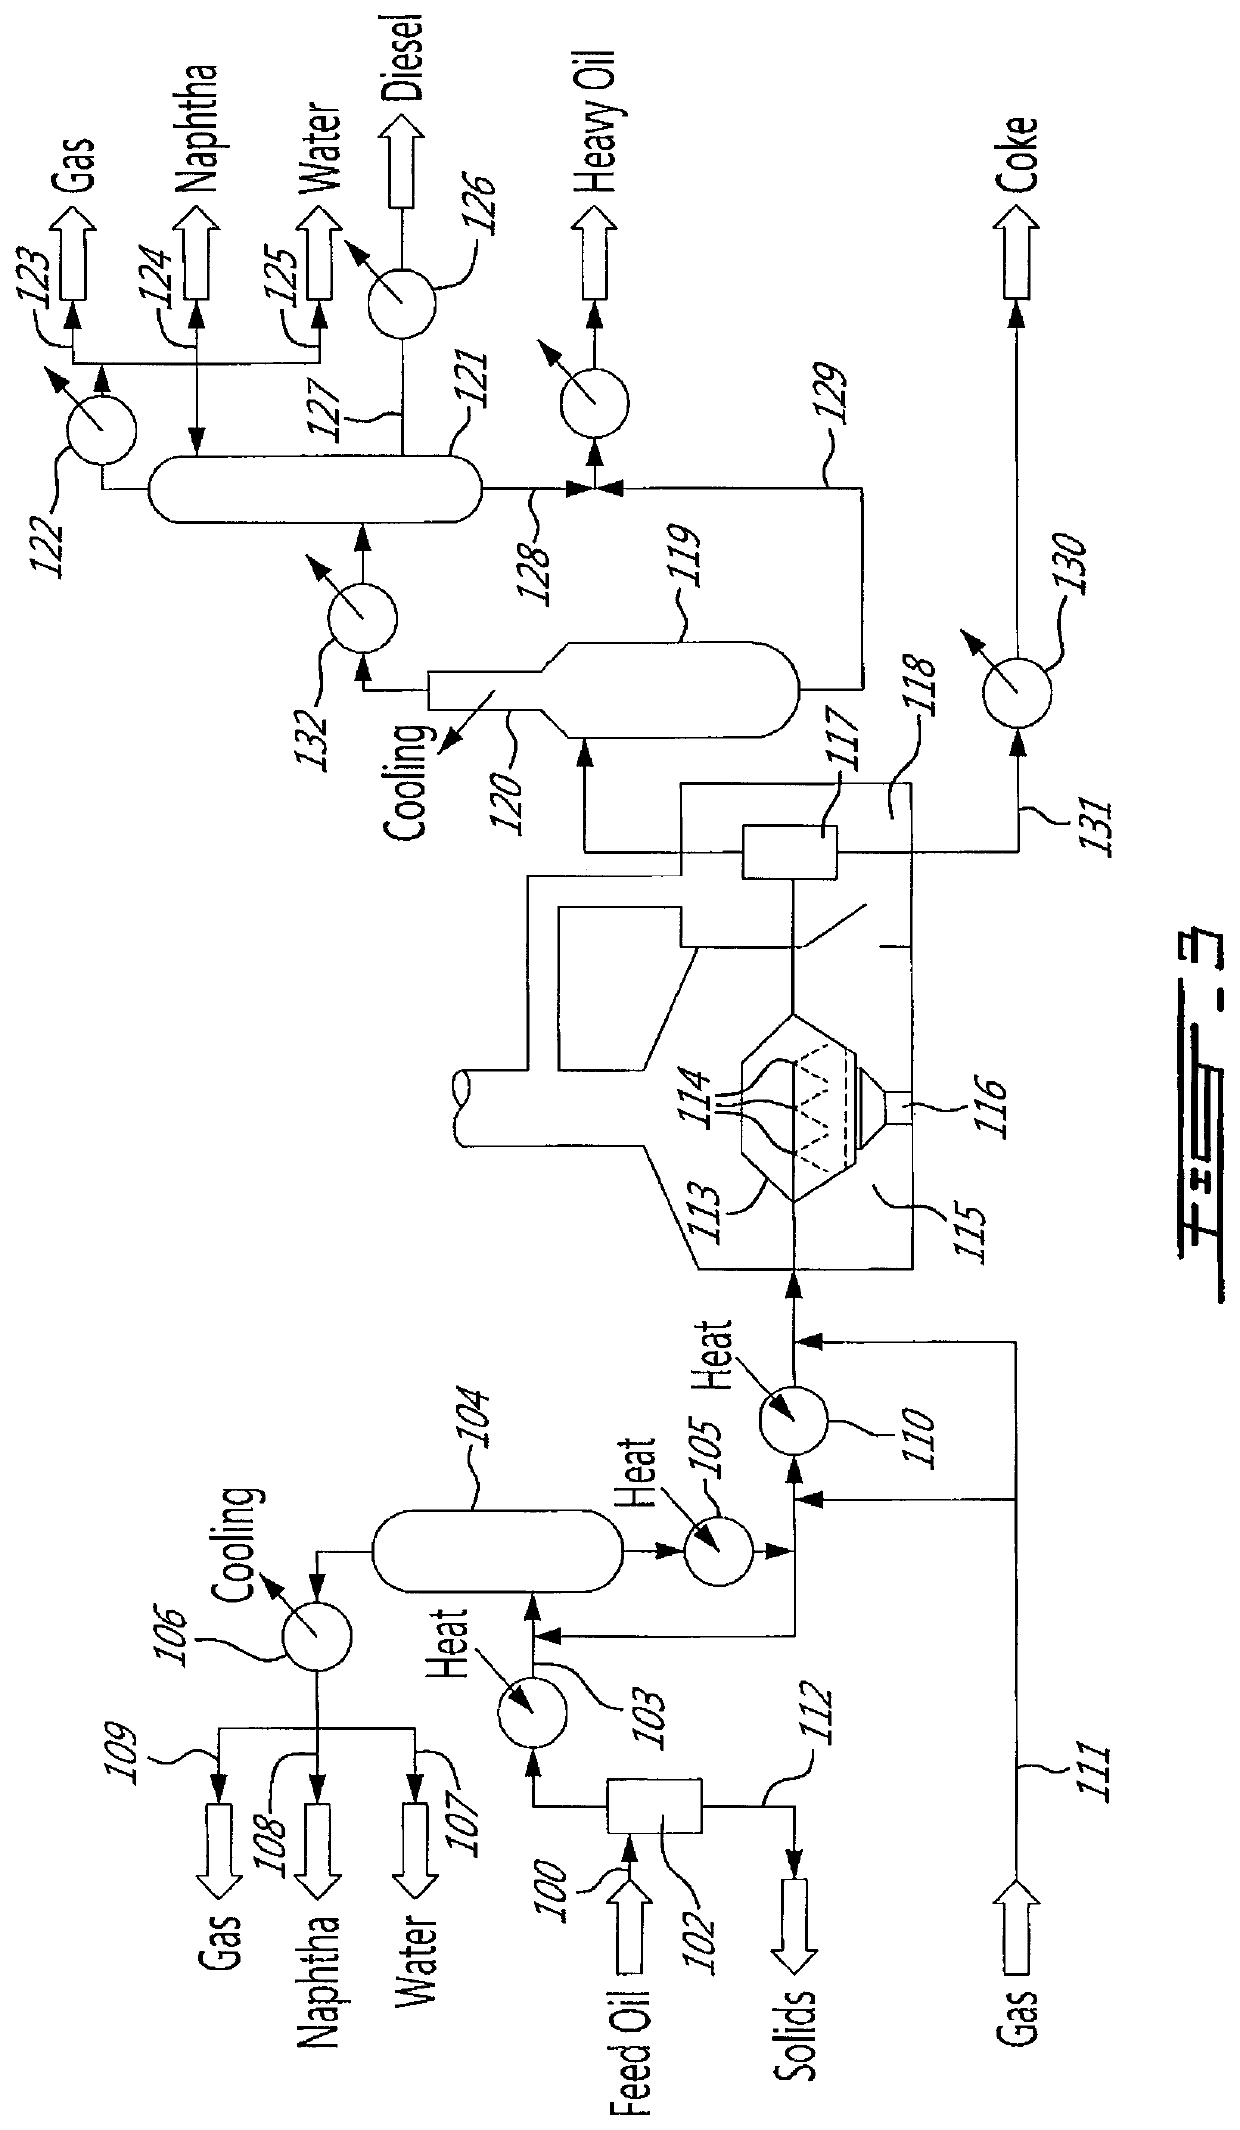 Hybrid thermal process to separate and transform contaminated or uncontaminated hydrocarbon materials into useful products, uses of the process, manufacturing of the corresponding system and plant